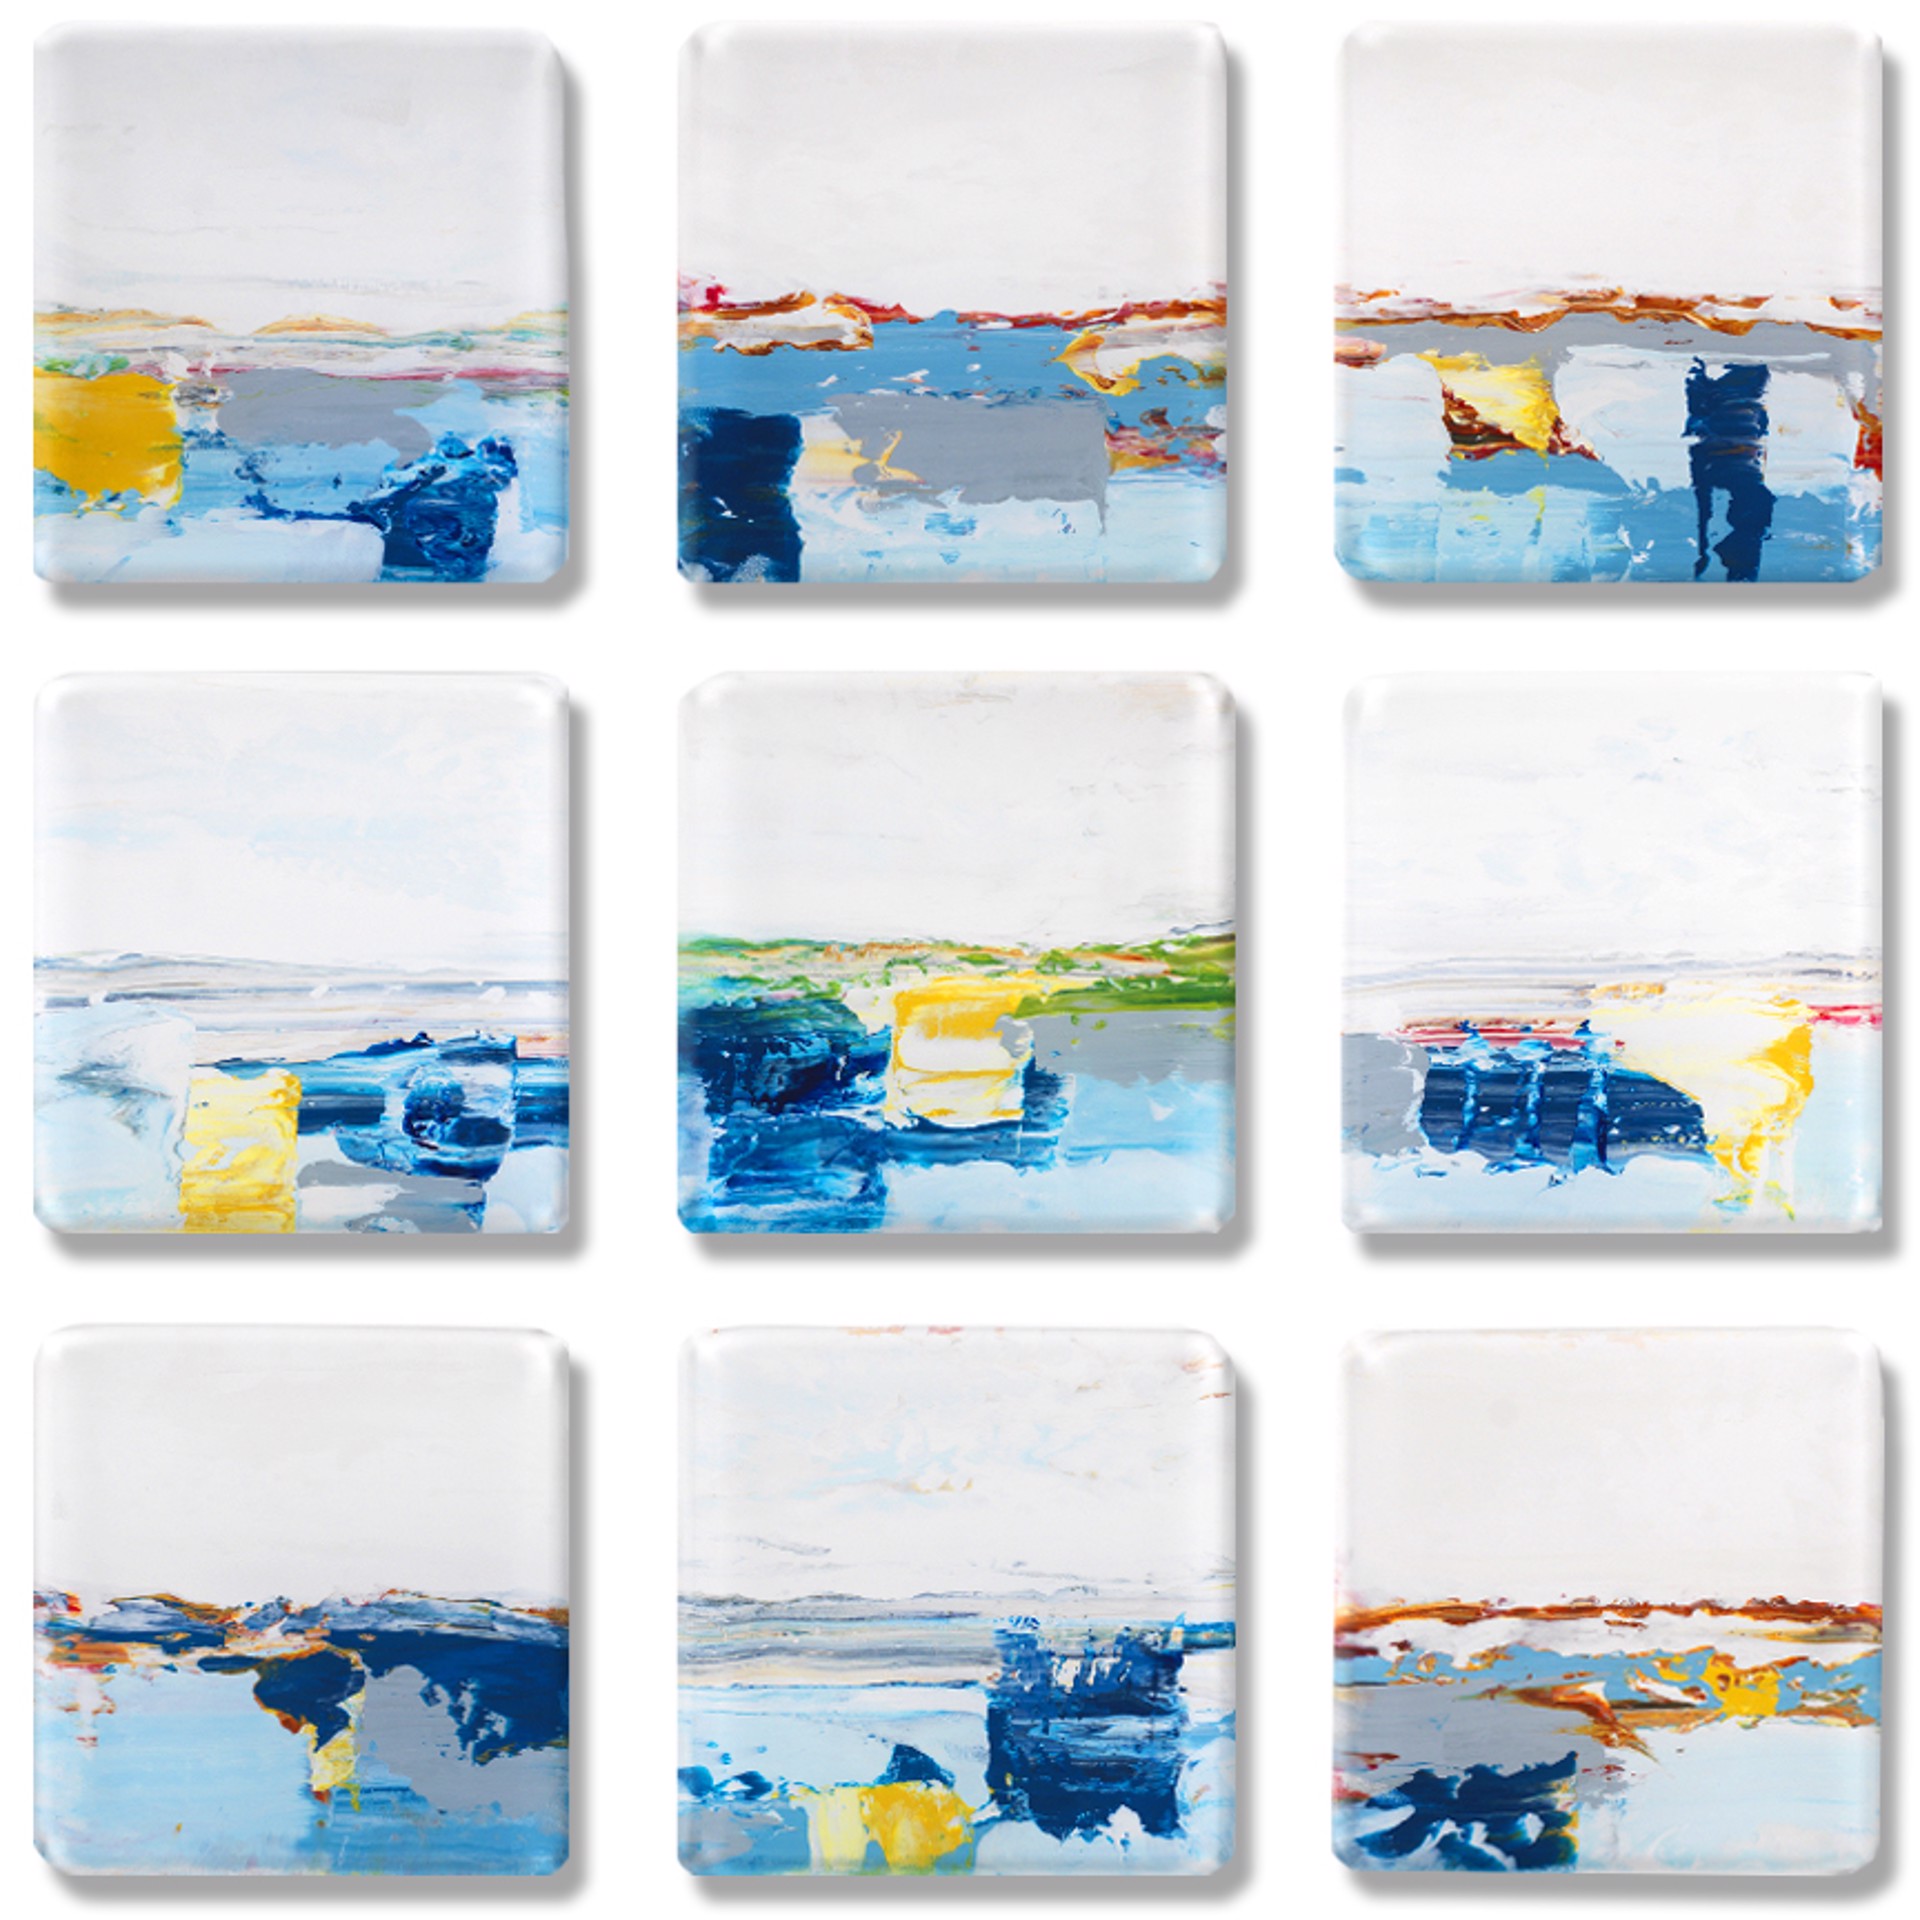 9 acrylic panels by John Schuyler featuring abstract seascapes